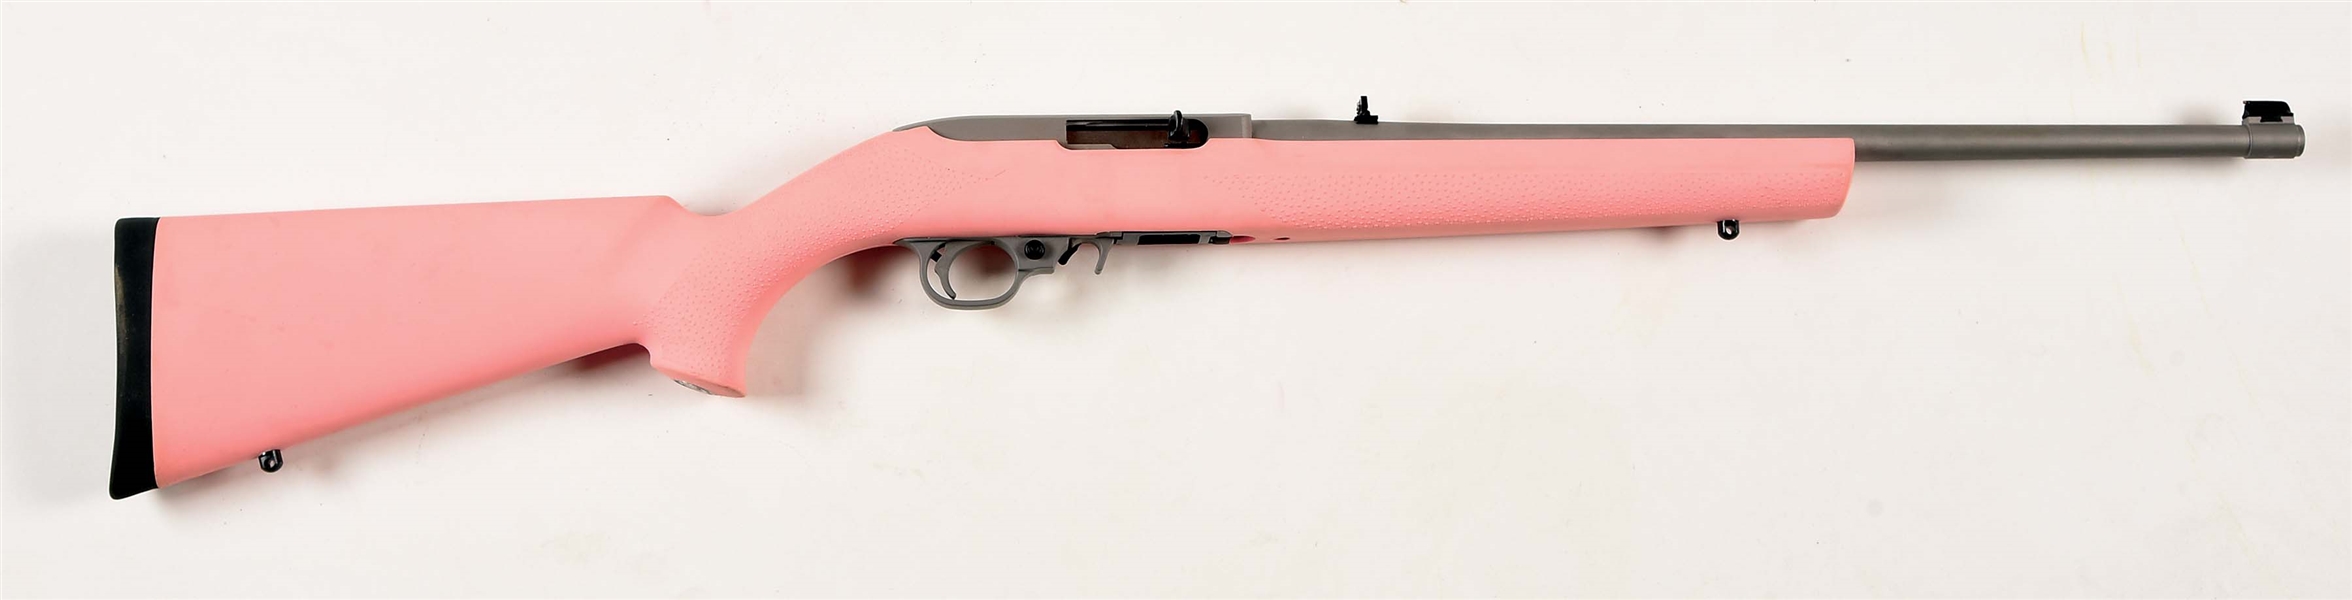 (M) RUGER 10/22 SEMI-AUTOMATIC RIFLE. 